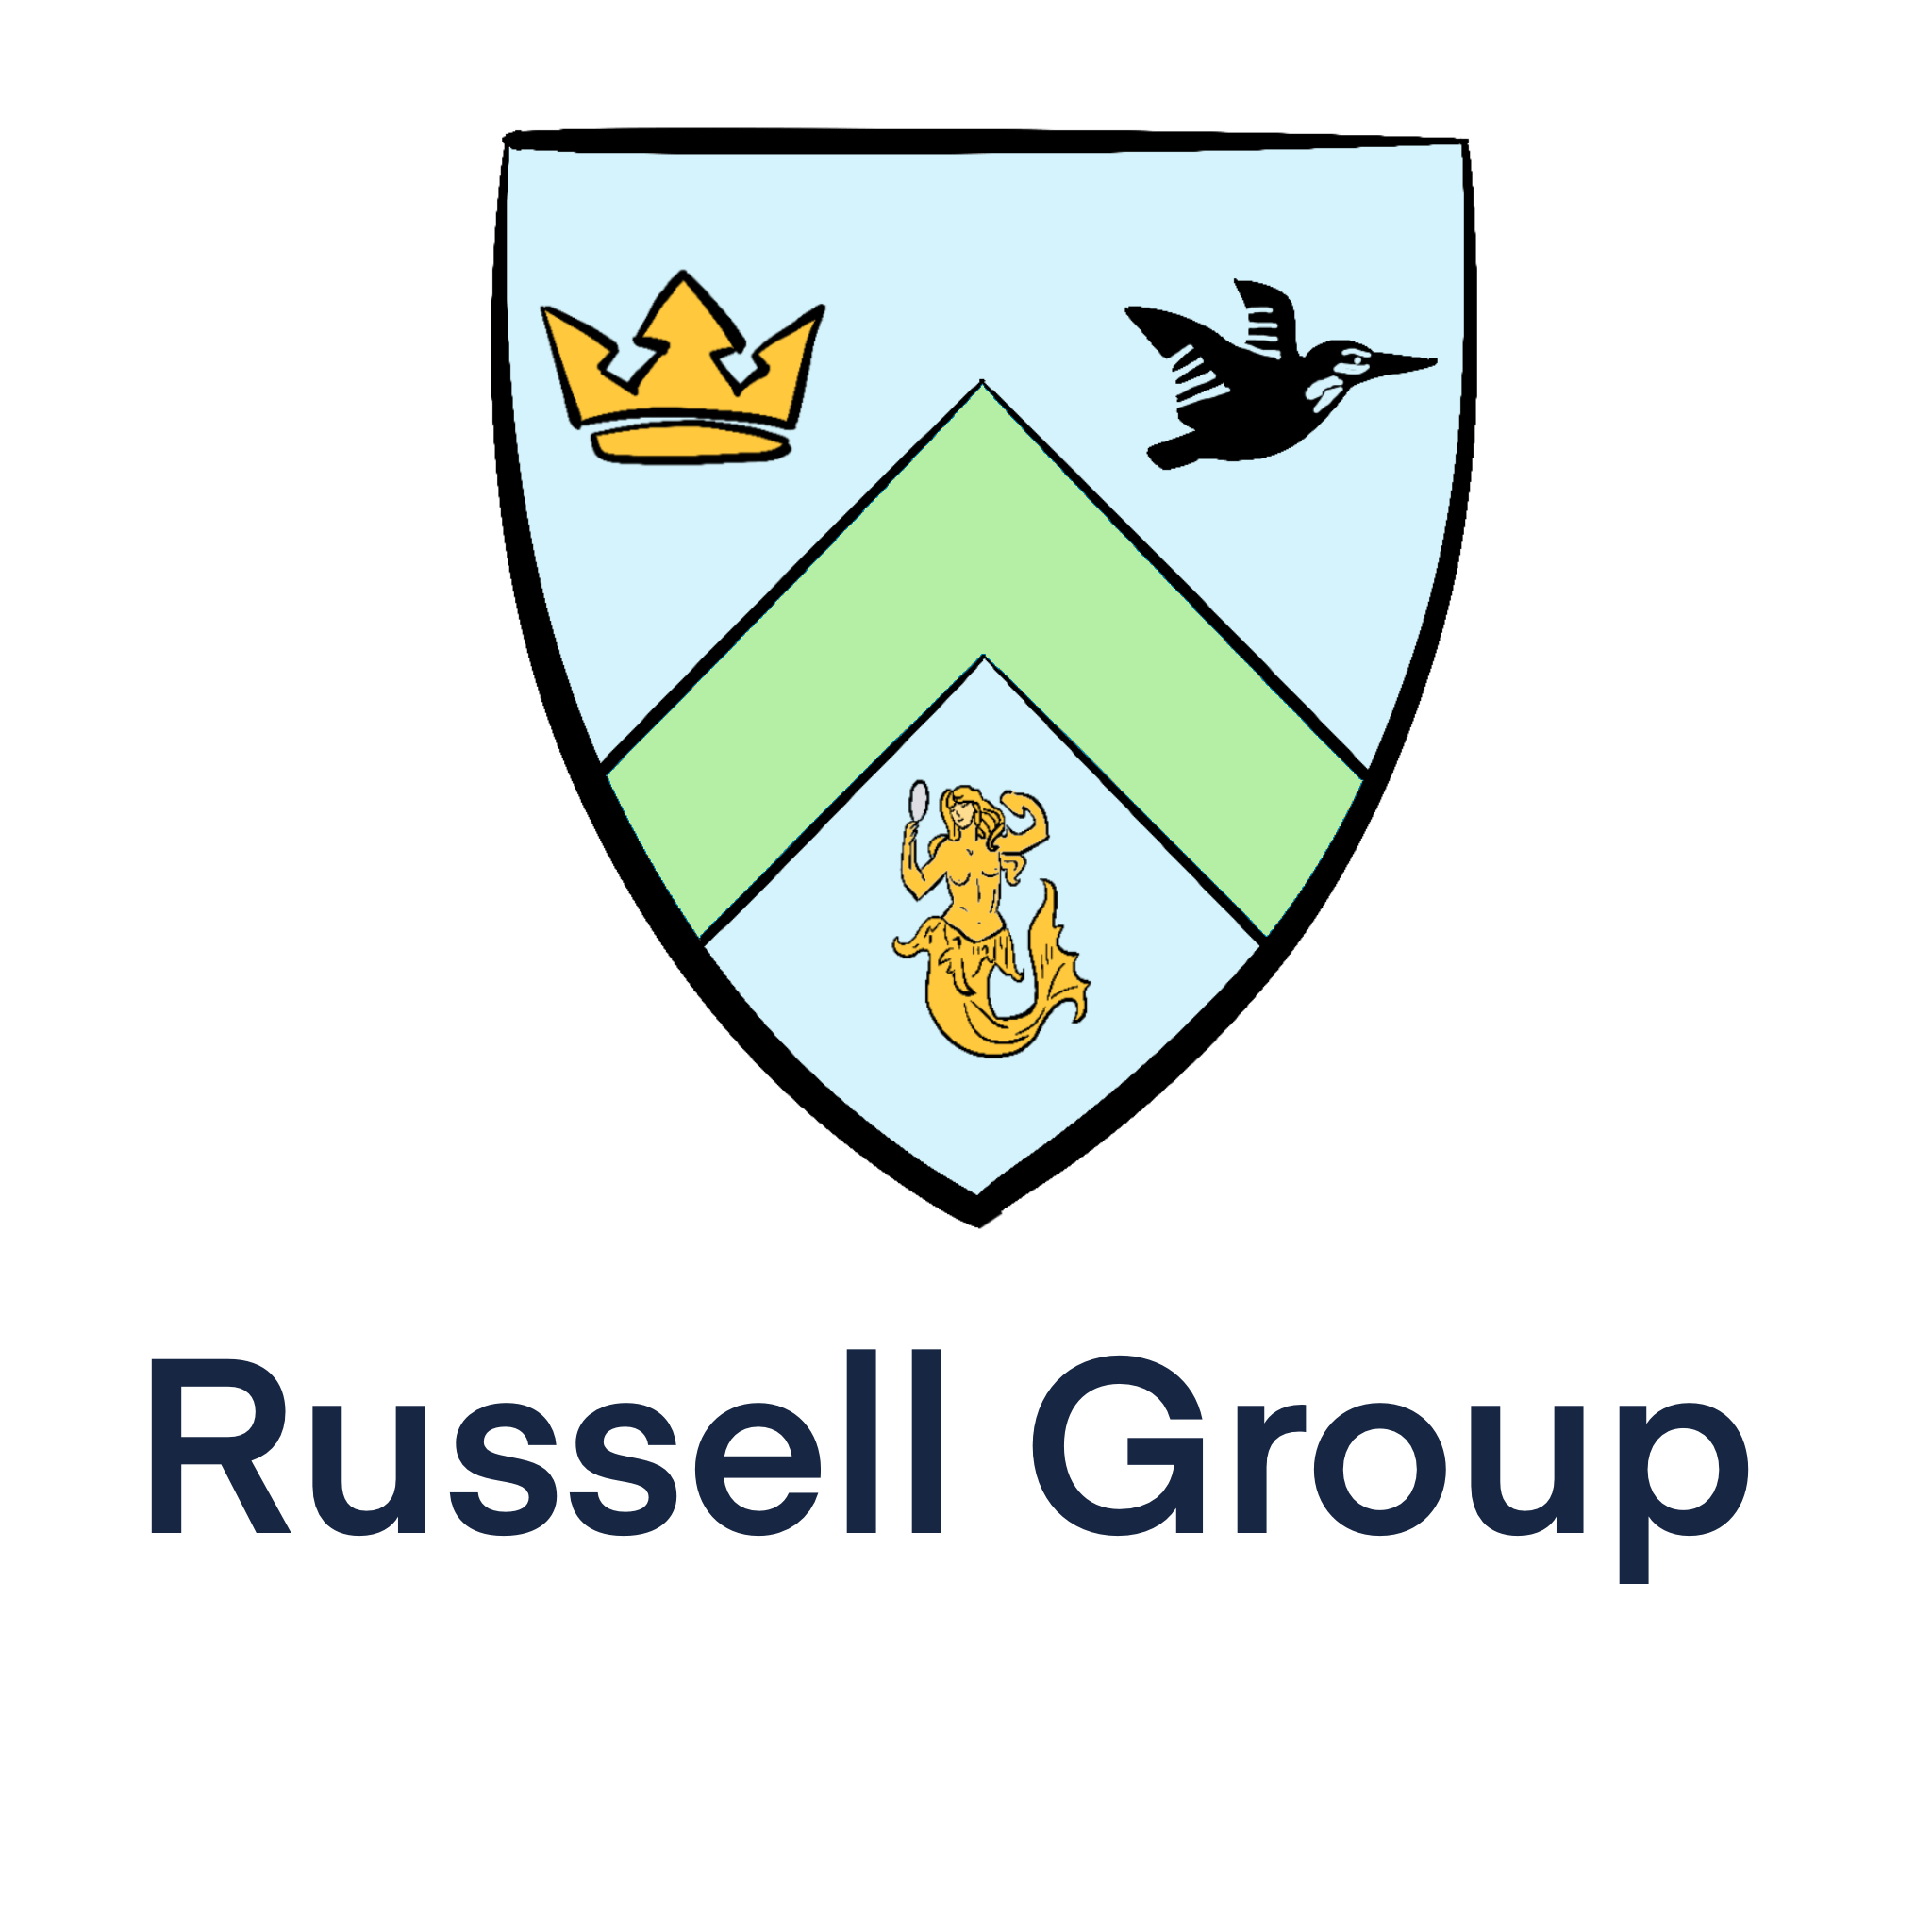 Ria holds a degree from a Russell Group University